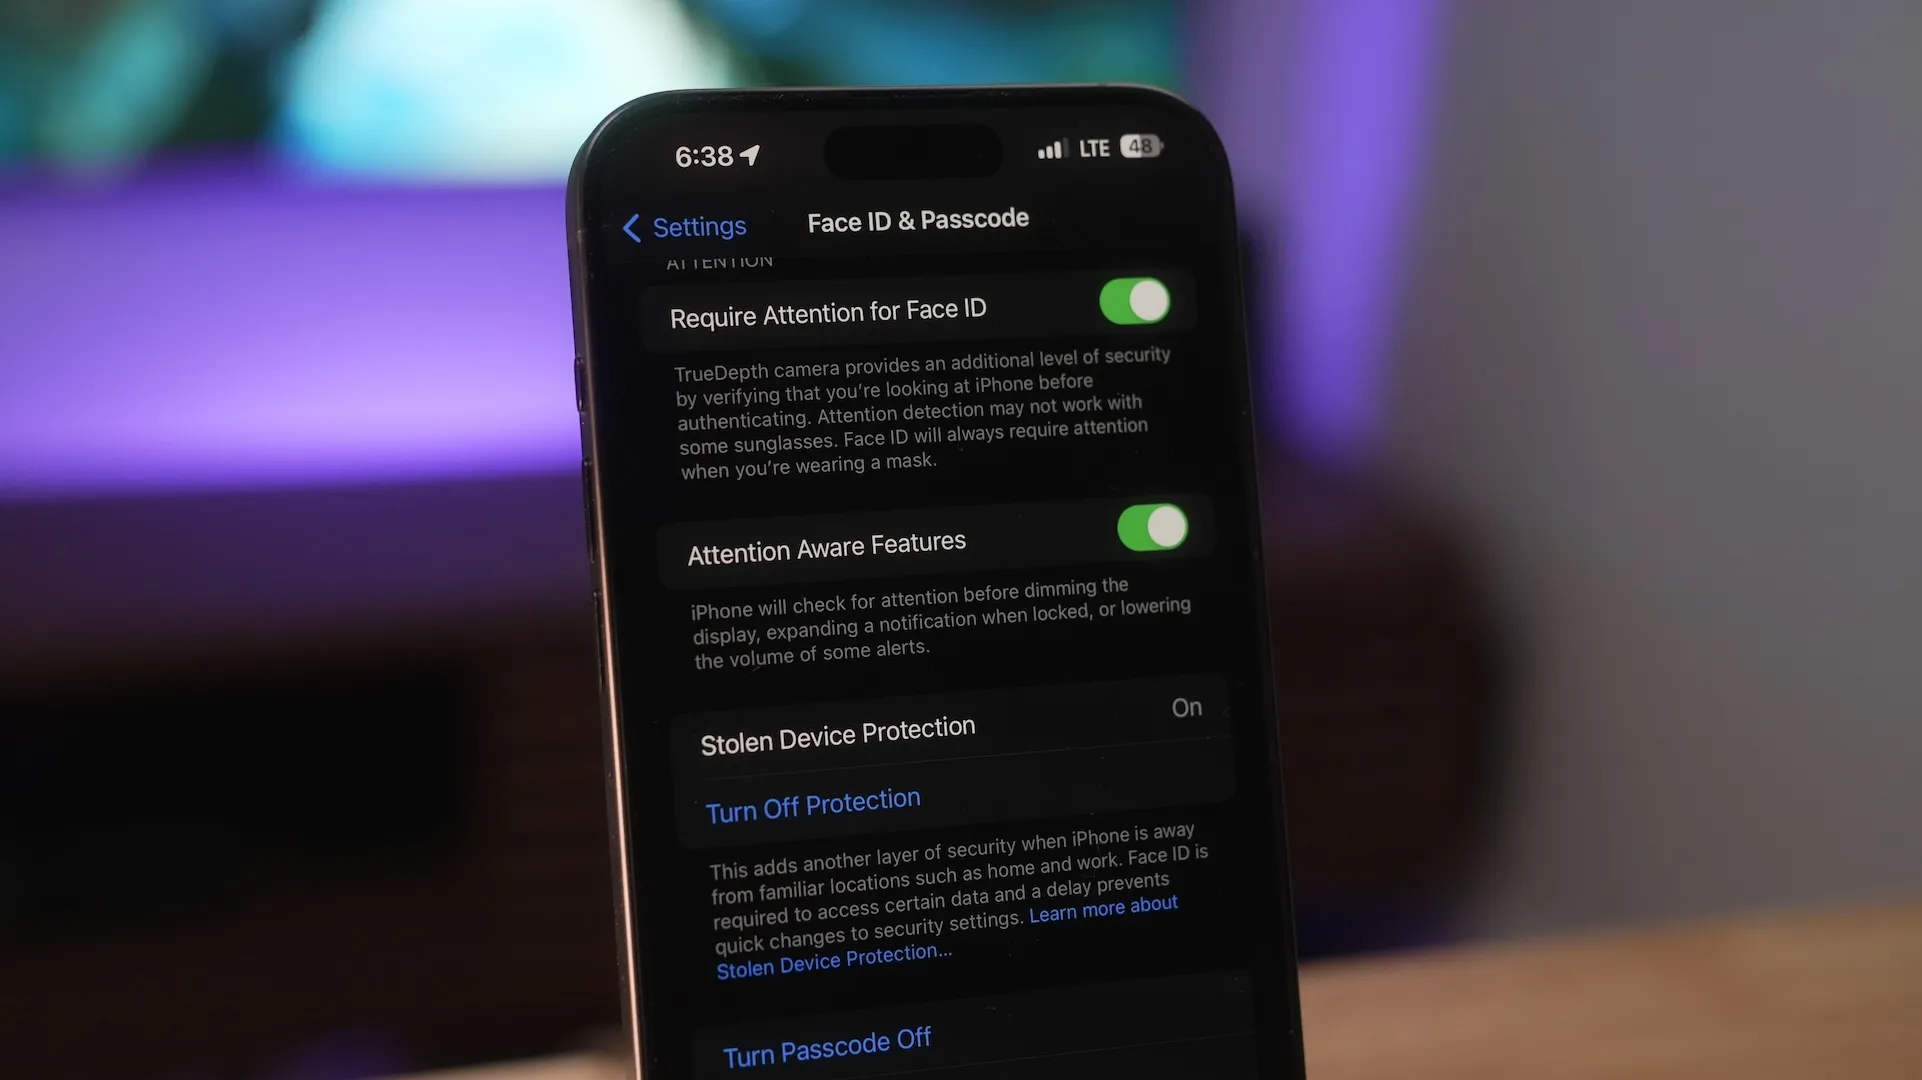 New iOS Update Unveils Stolen Device Protection - How to Keep Your iPhone Safe From Thieves